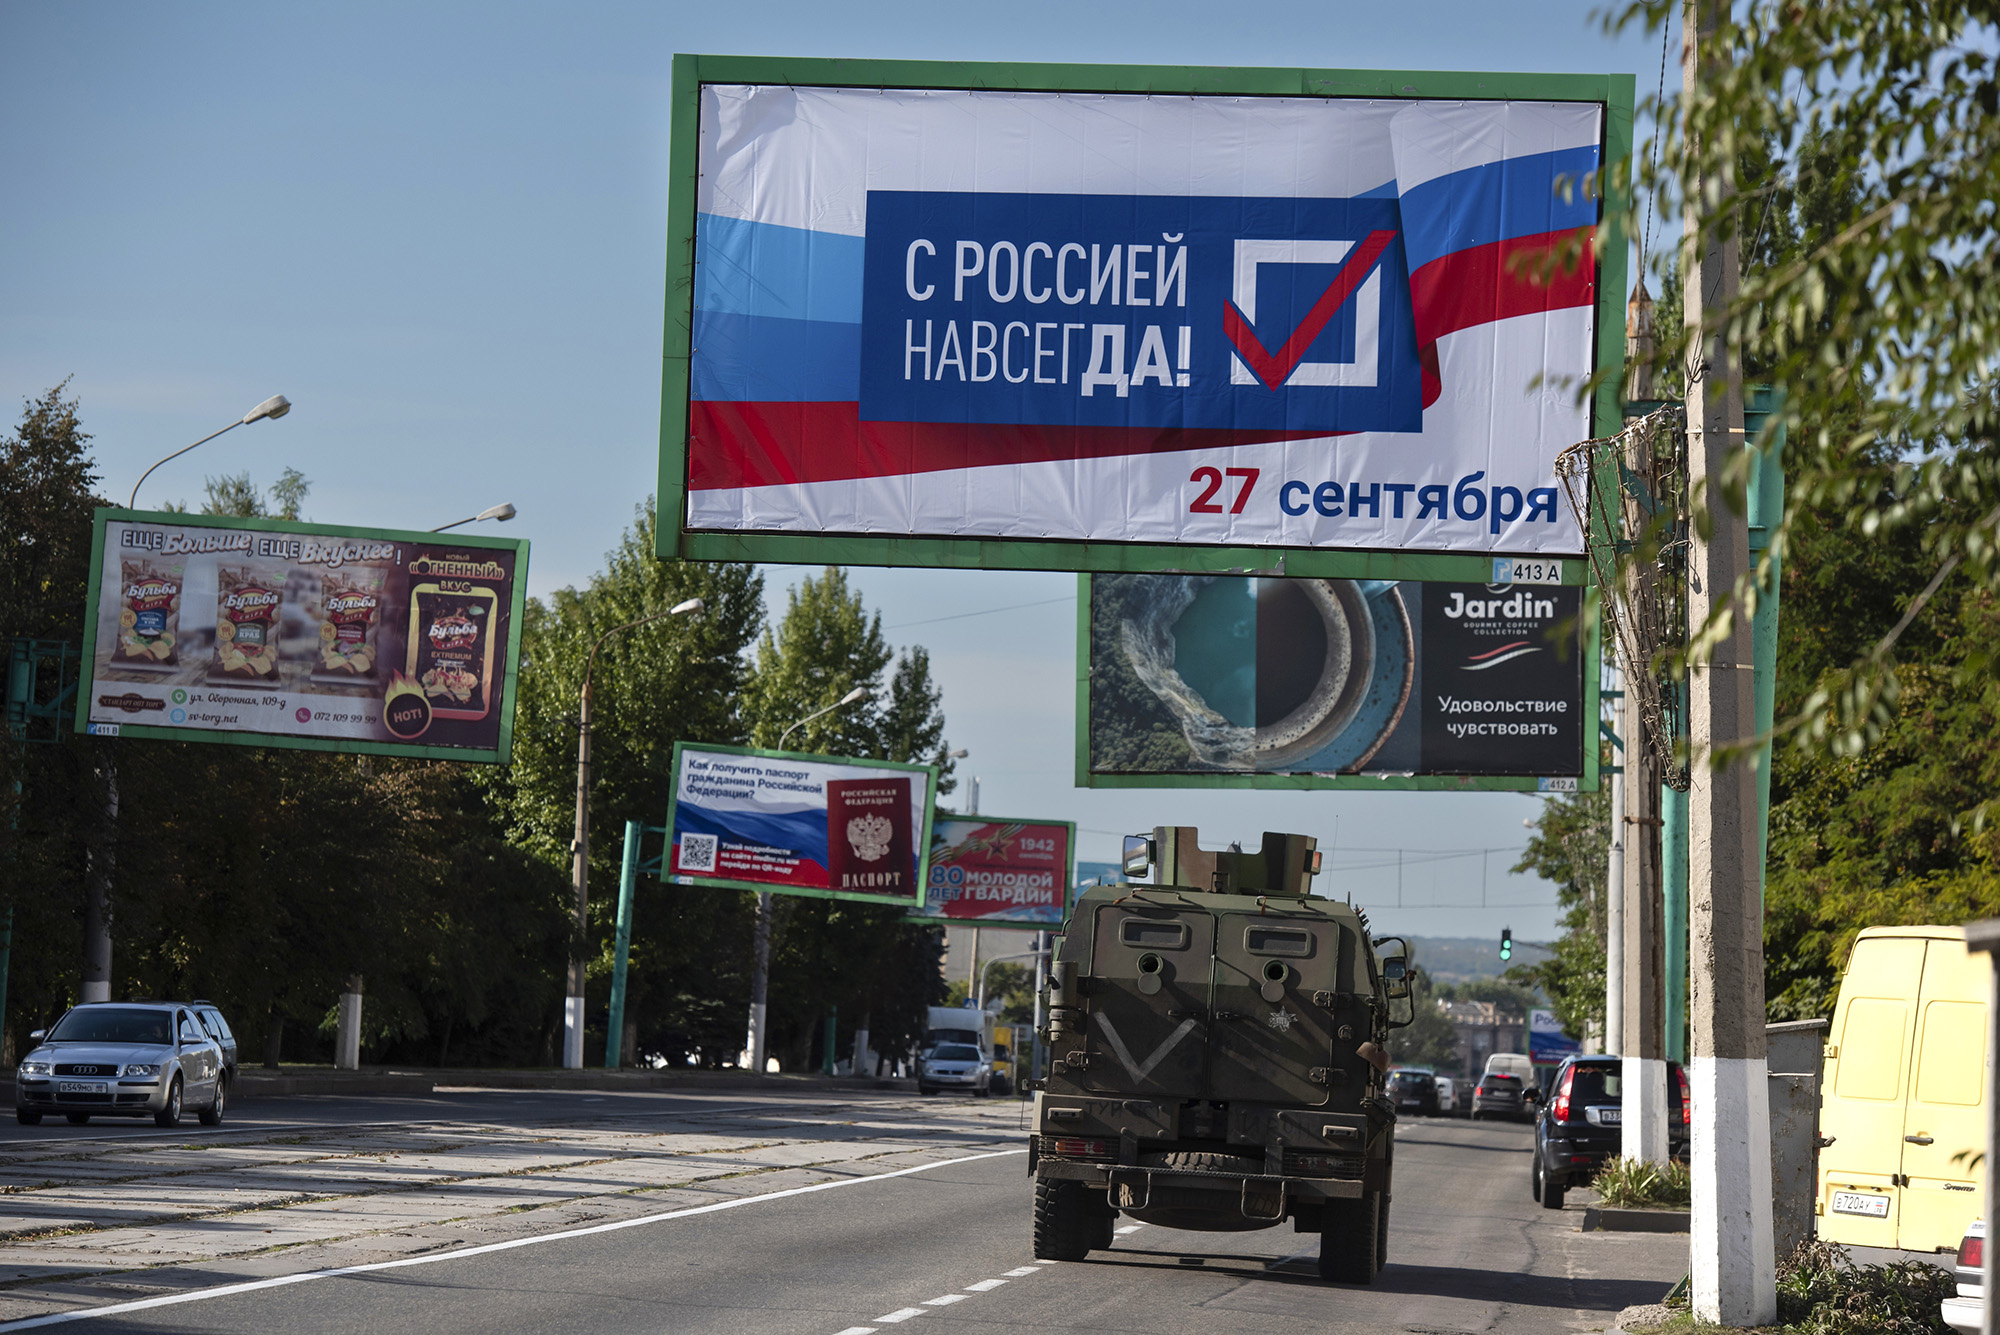 A military vehicle drives down a street with a billboard reading "With Russia Forever, September 27th" ahead of a referendum in Luhansk, eastern Ukraine, on September 22.